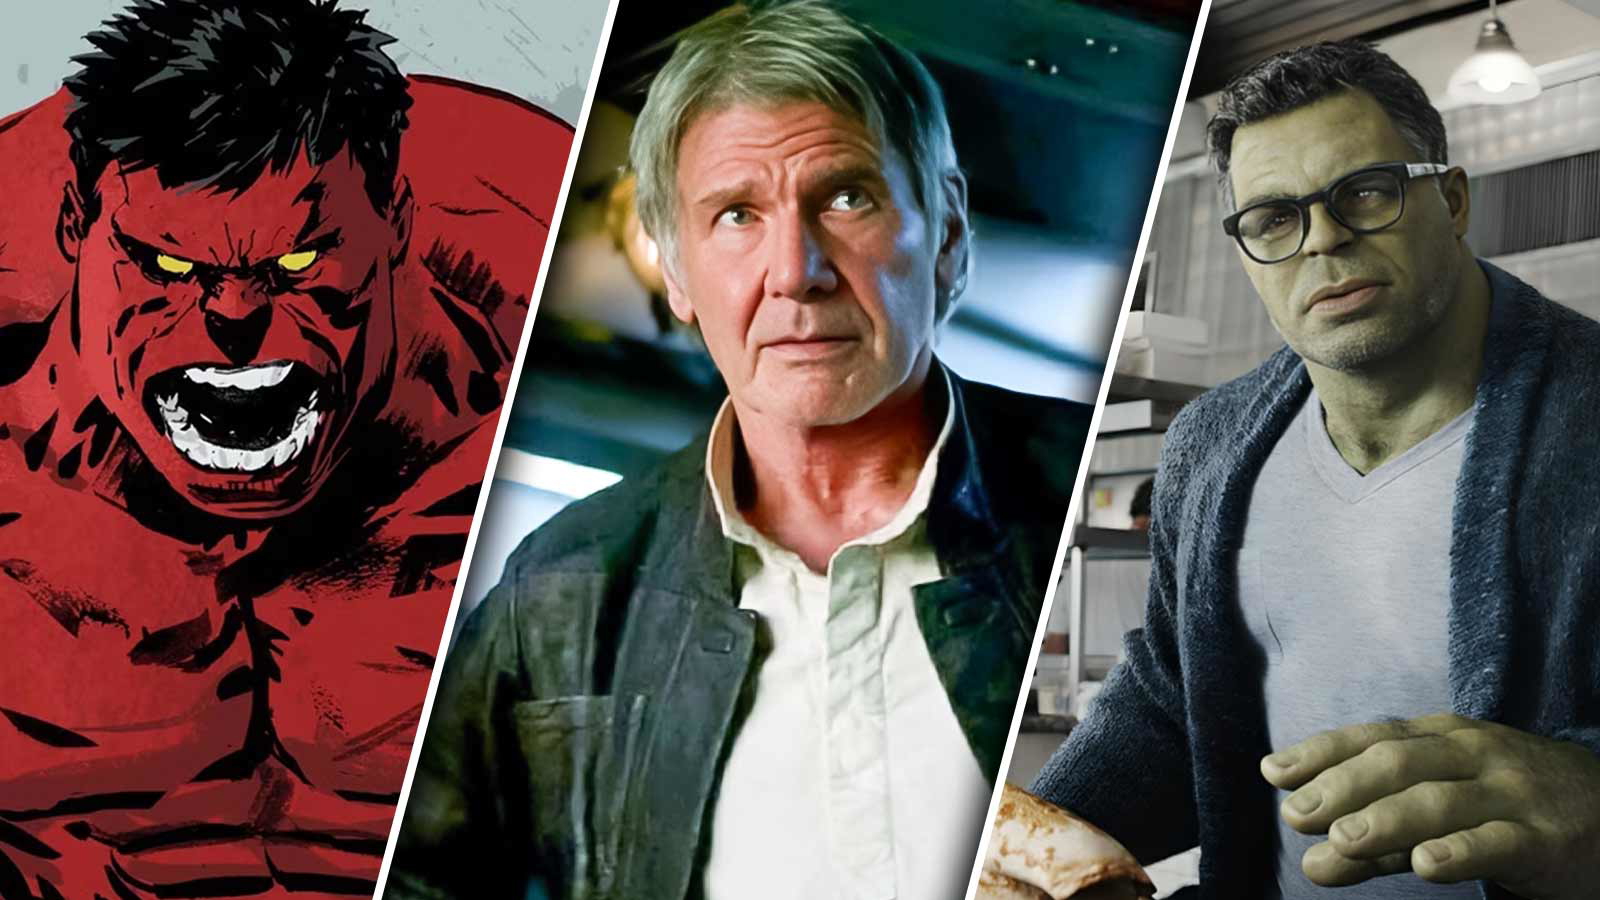 “He looks insanely good”: First Look of Harrison Ford’s Red Hulk is Scary Enough to Overshadow Mark Ruffalo’s Smart Hulk in MCU